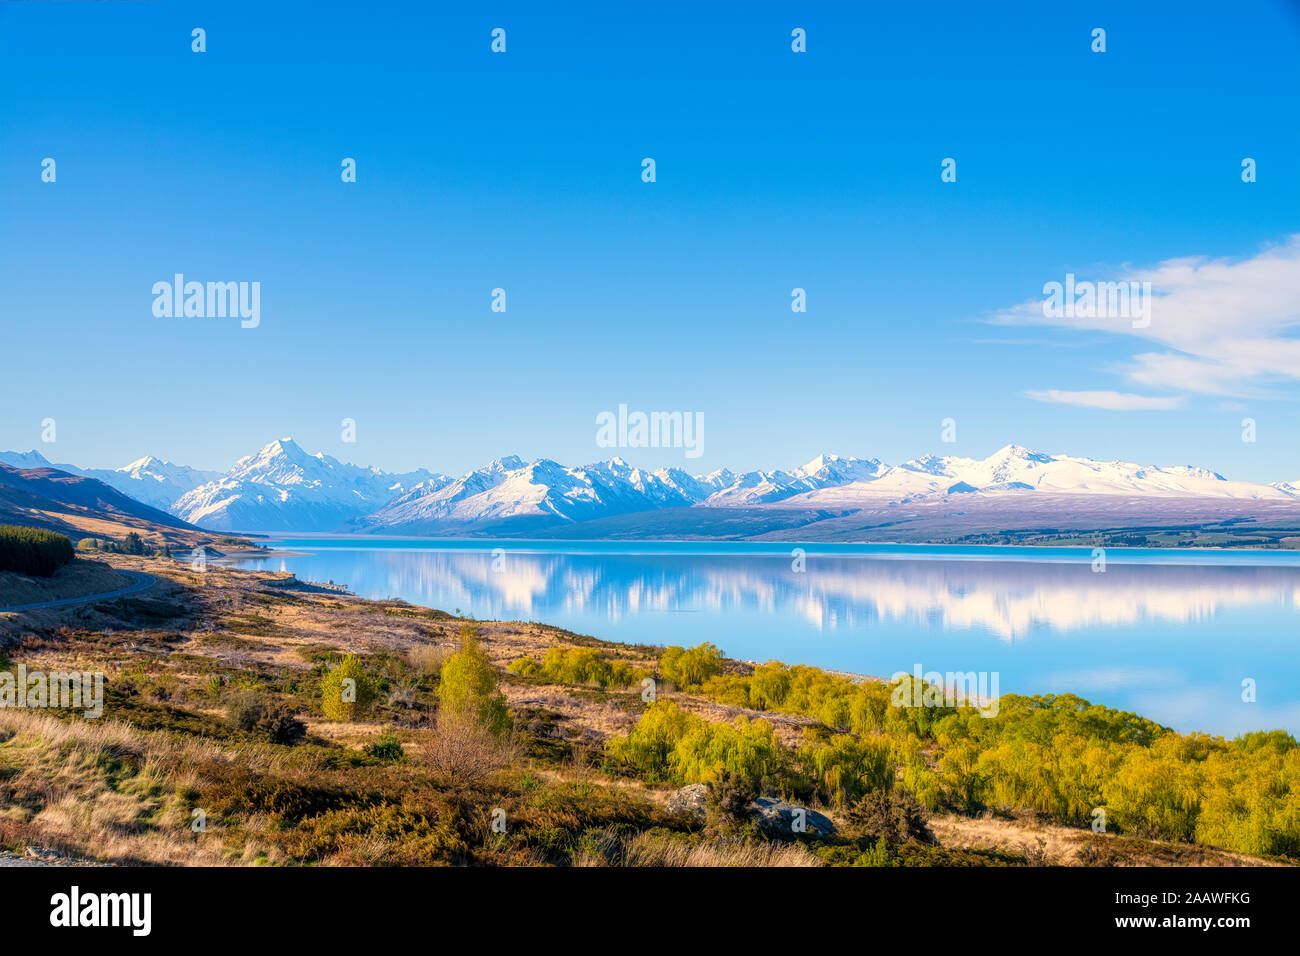 New Zealand, South Island, Scenic view of shore of Lake Pukaki with snowcapped mountains in background Stock Photo